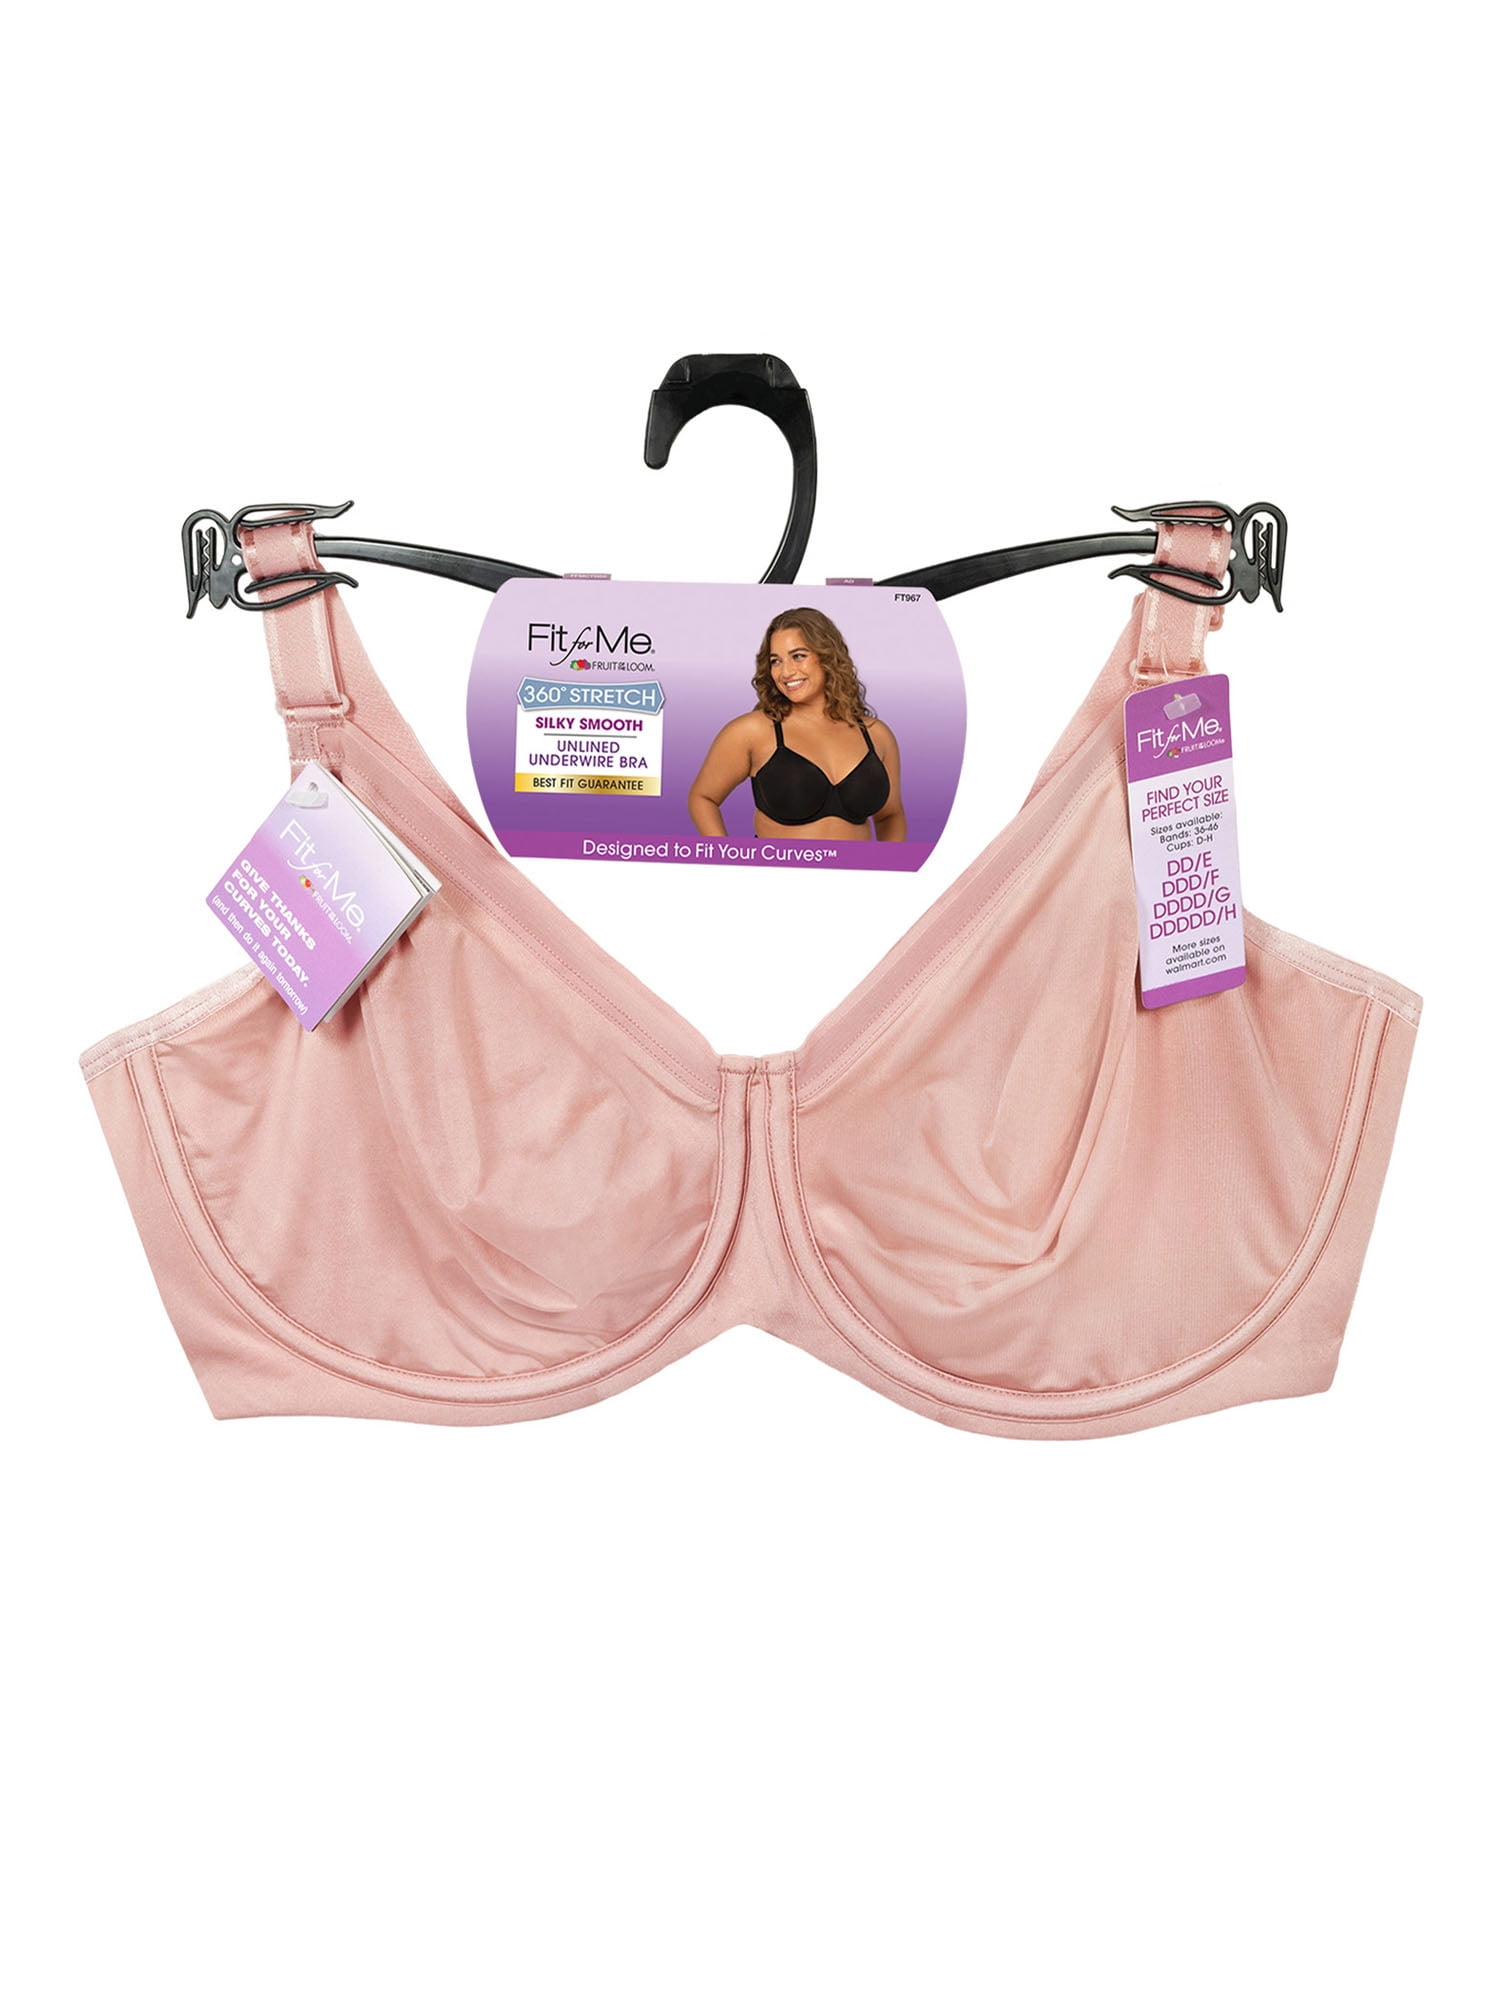 Fruit of the Loom, Intimates & Sleepwear, Pink Fruit Of The Loom Cotton  Underwire Bra 38d